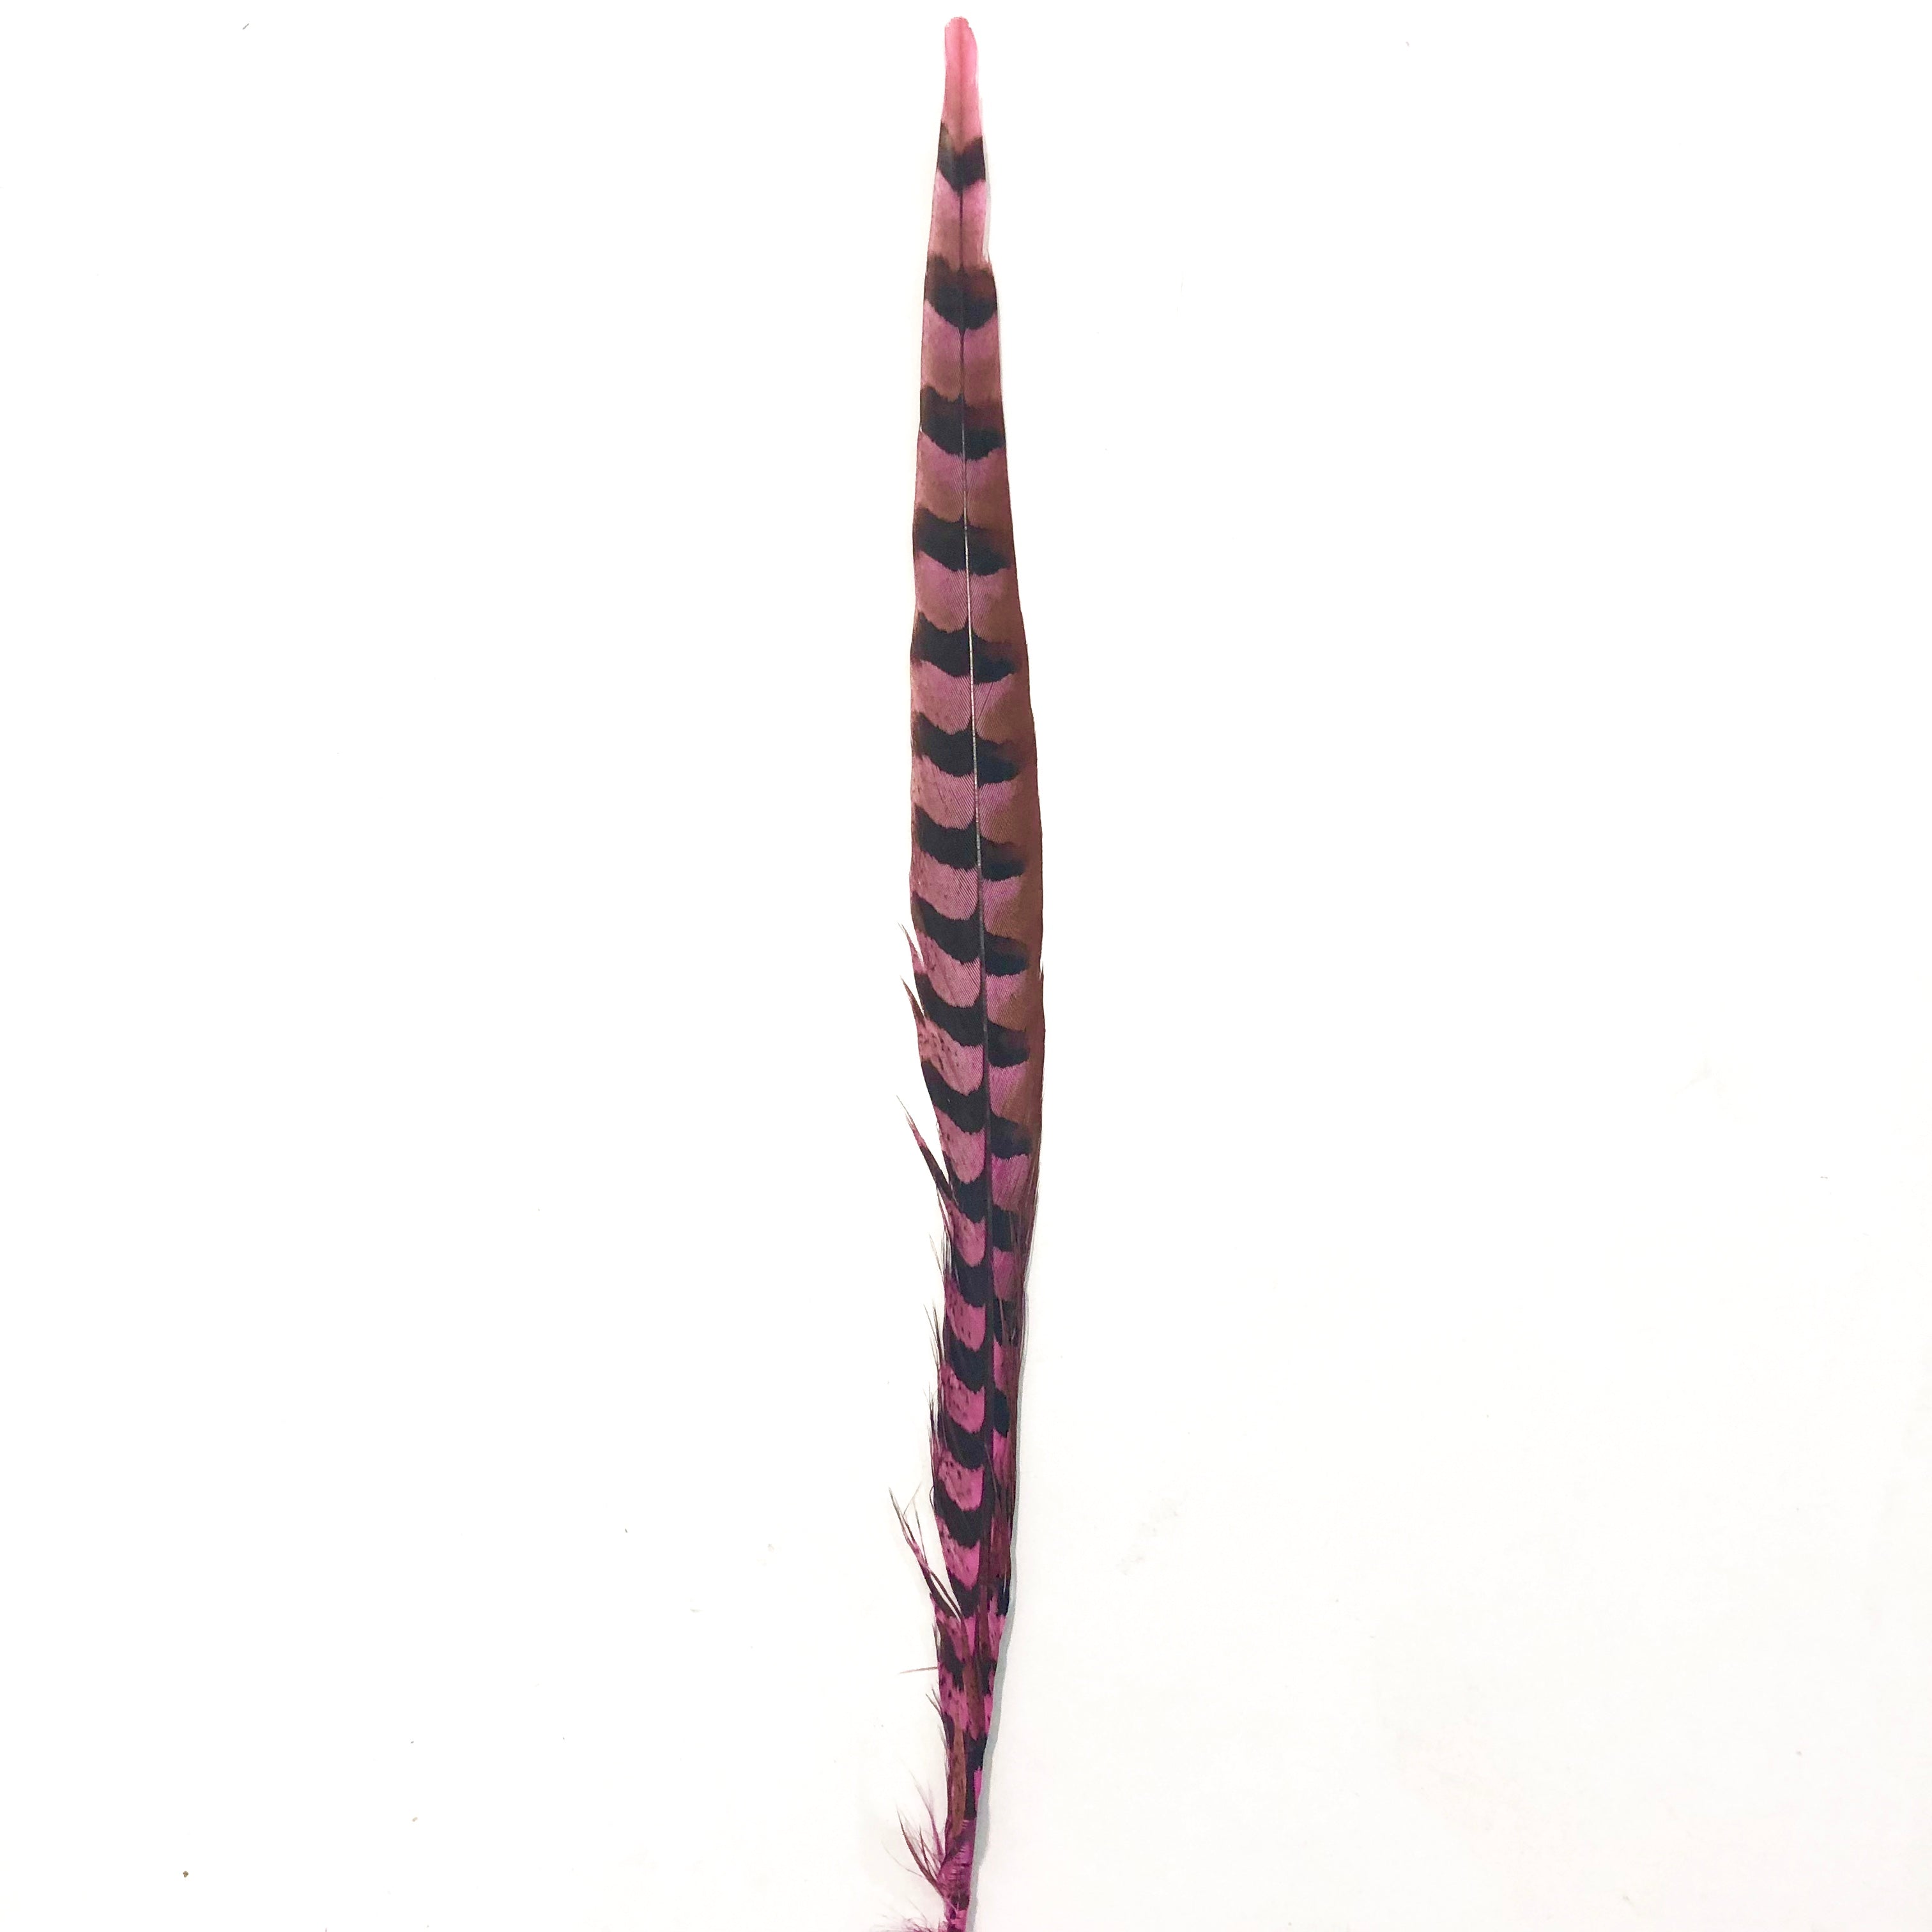 18" to 20" Reeves Pheasant Tail Feather - Hot Pink ((SECONDS))